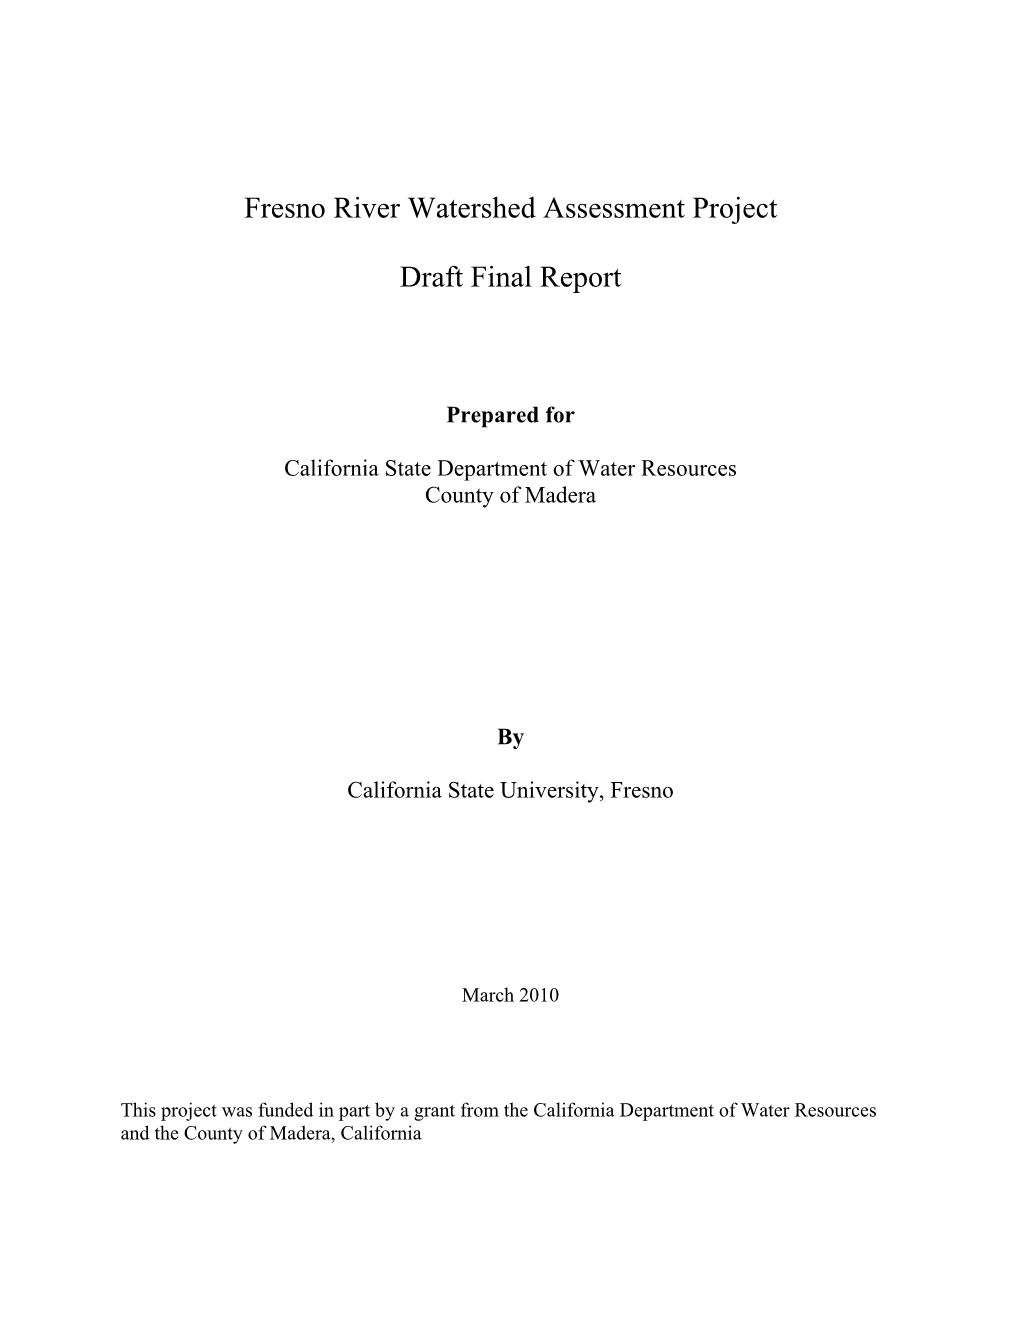 Fresno River Watershed Assessment Project Draft Final Report